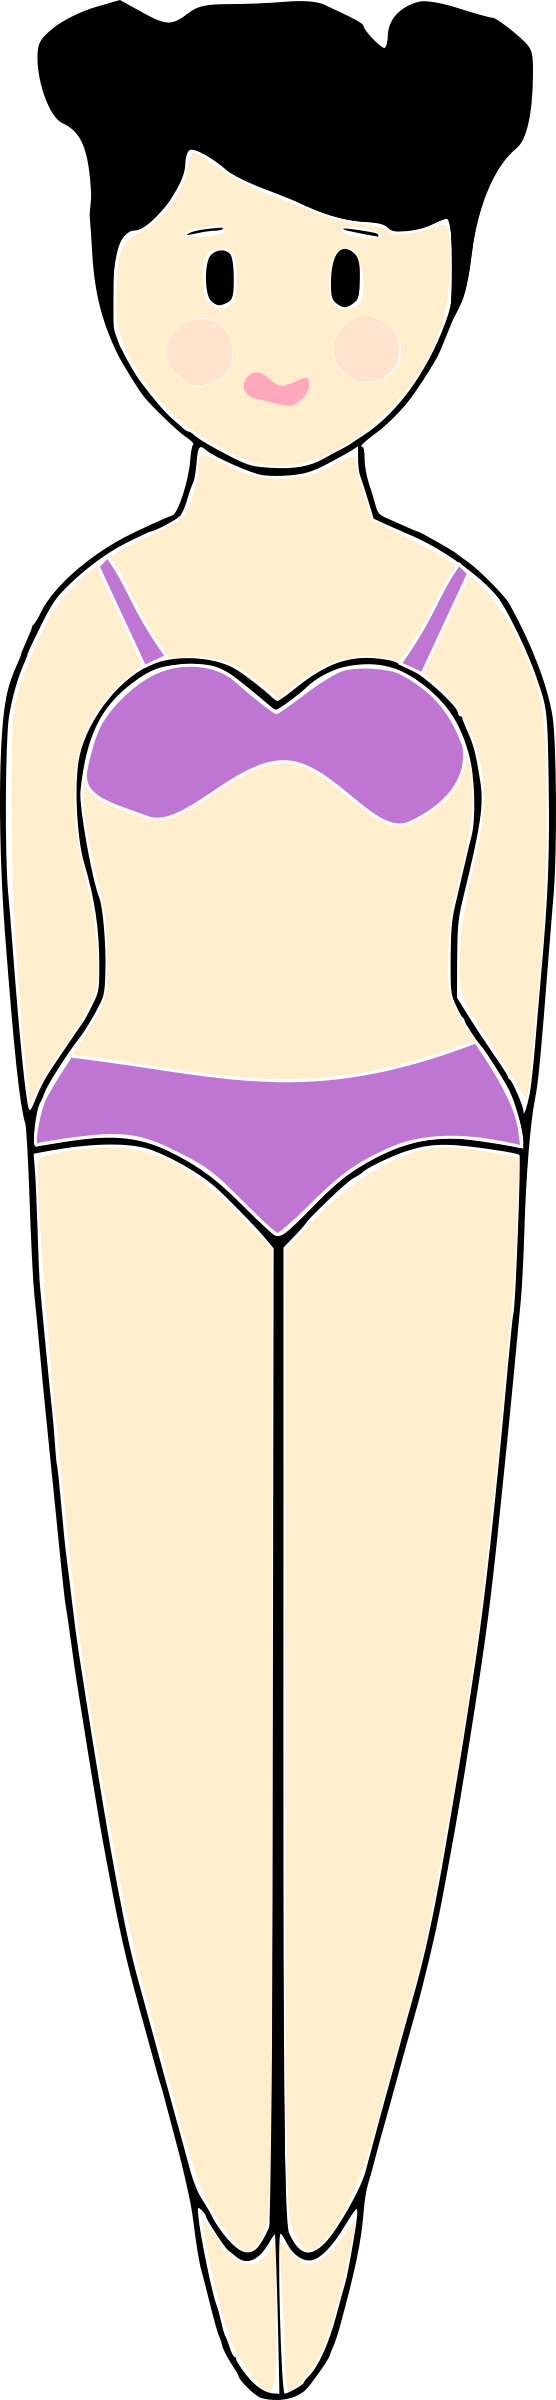 Download Bathing Suit, Girl, Swim. Royalty-Free Vector Graphic - Pixabay